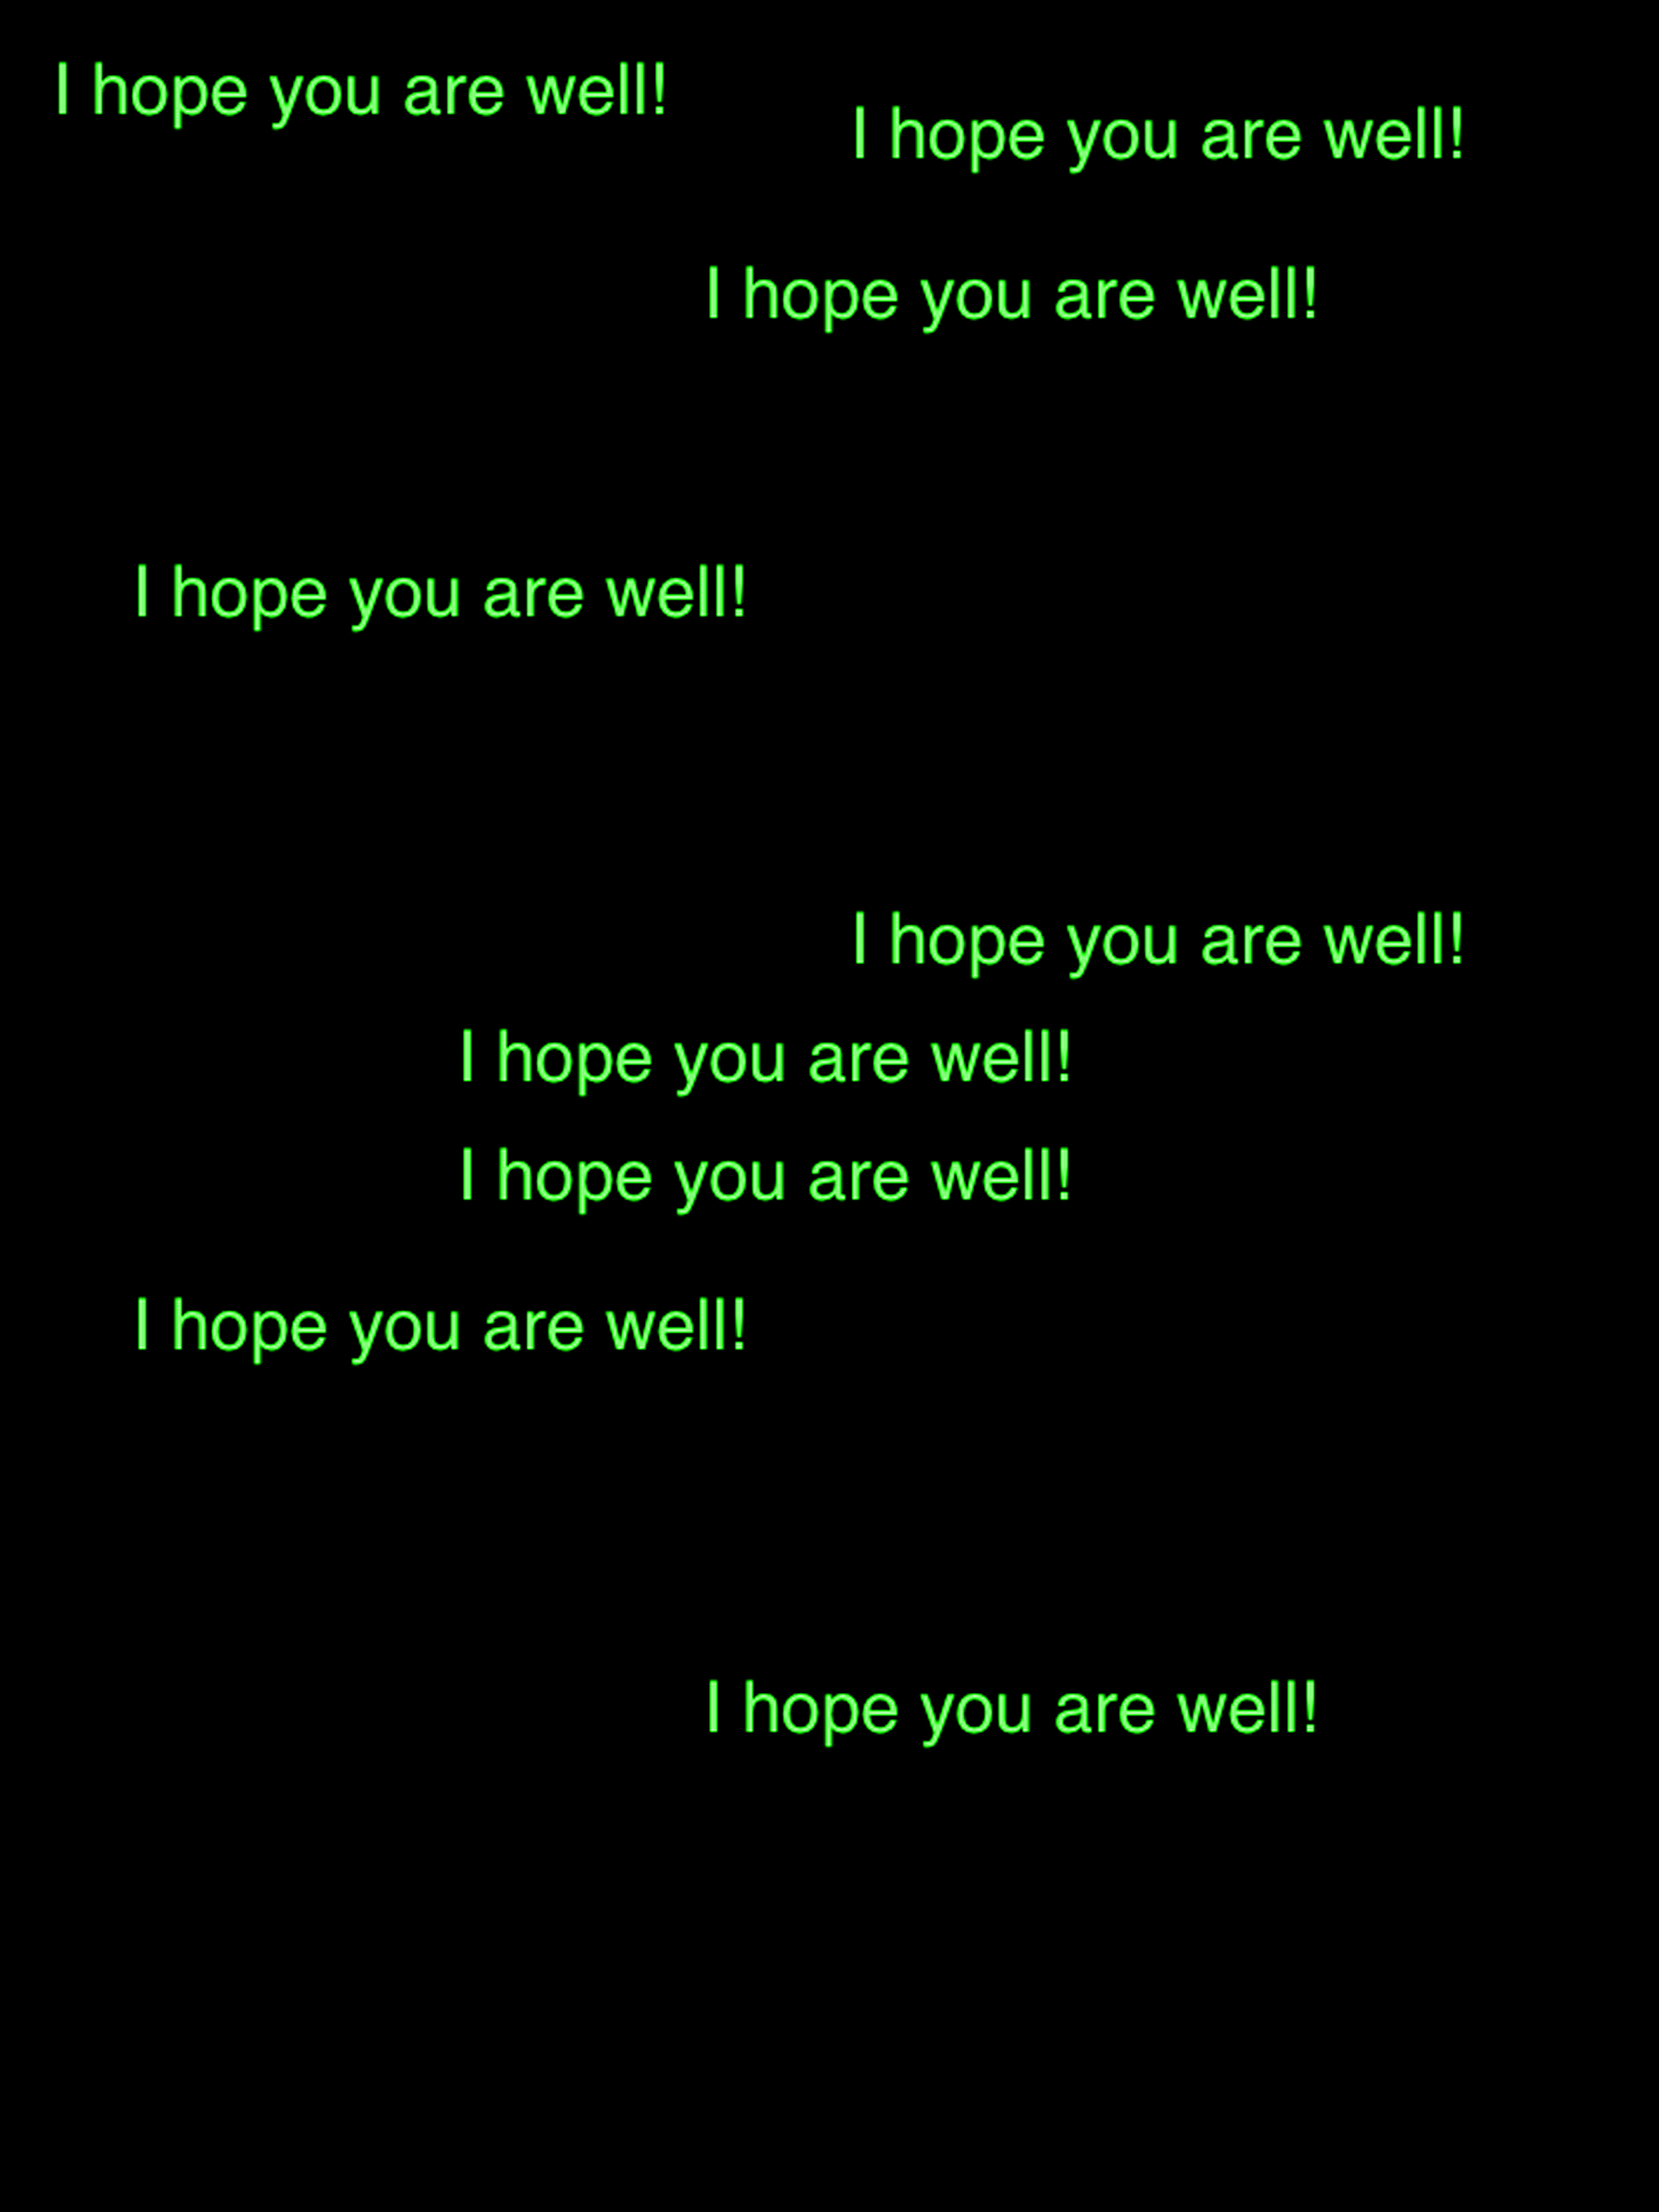 I_HOPE_YOU_ARE_WELL